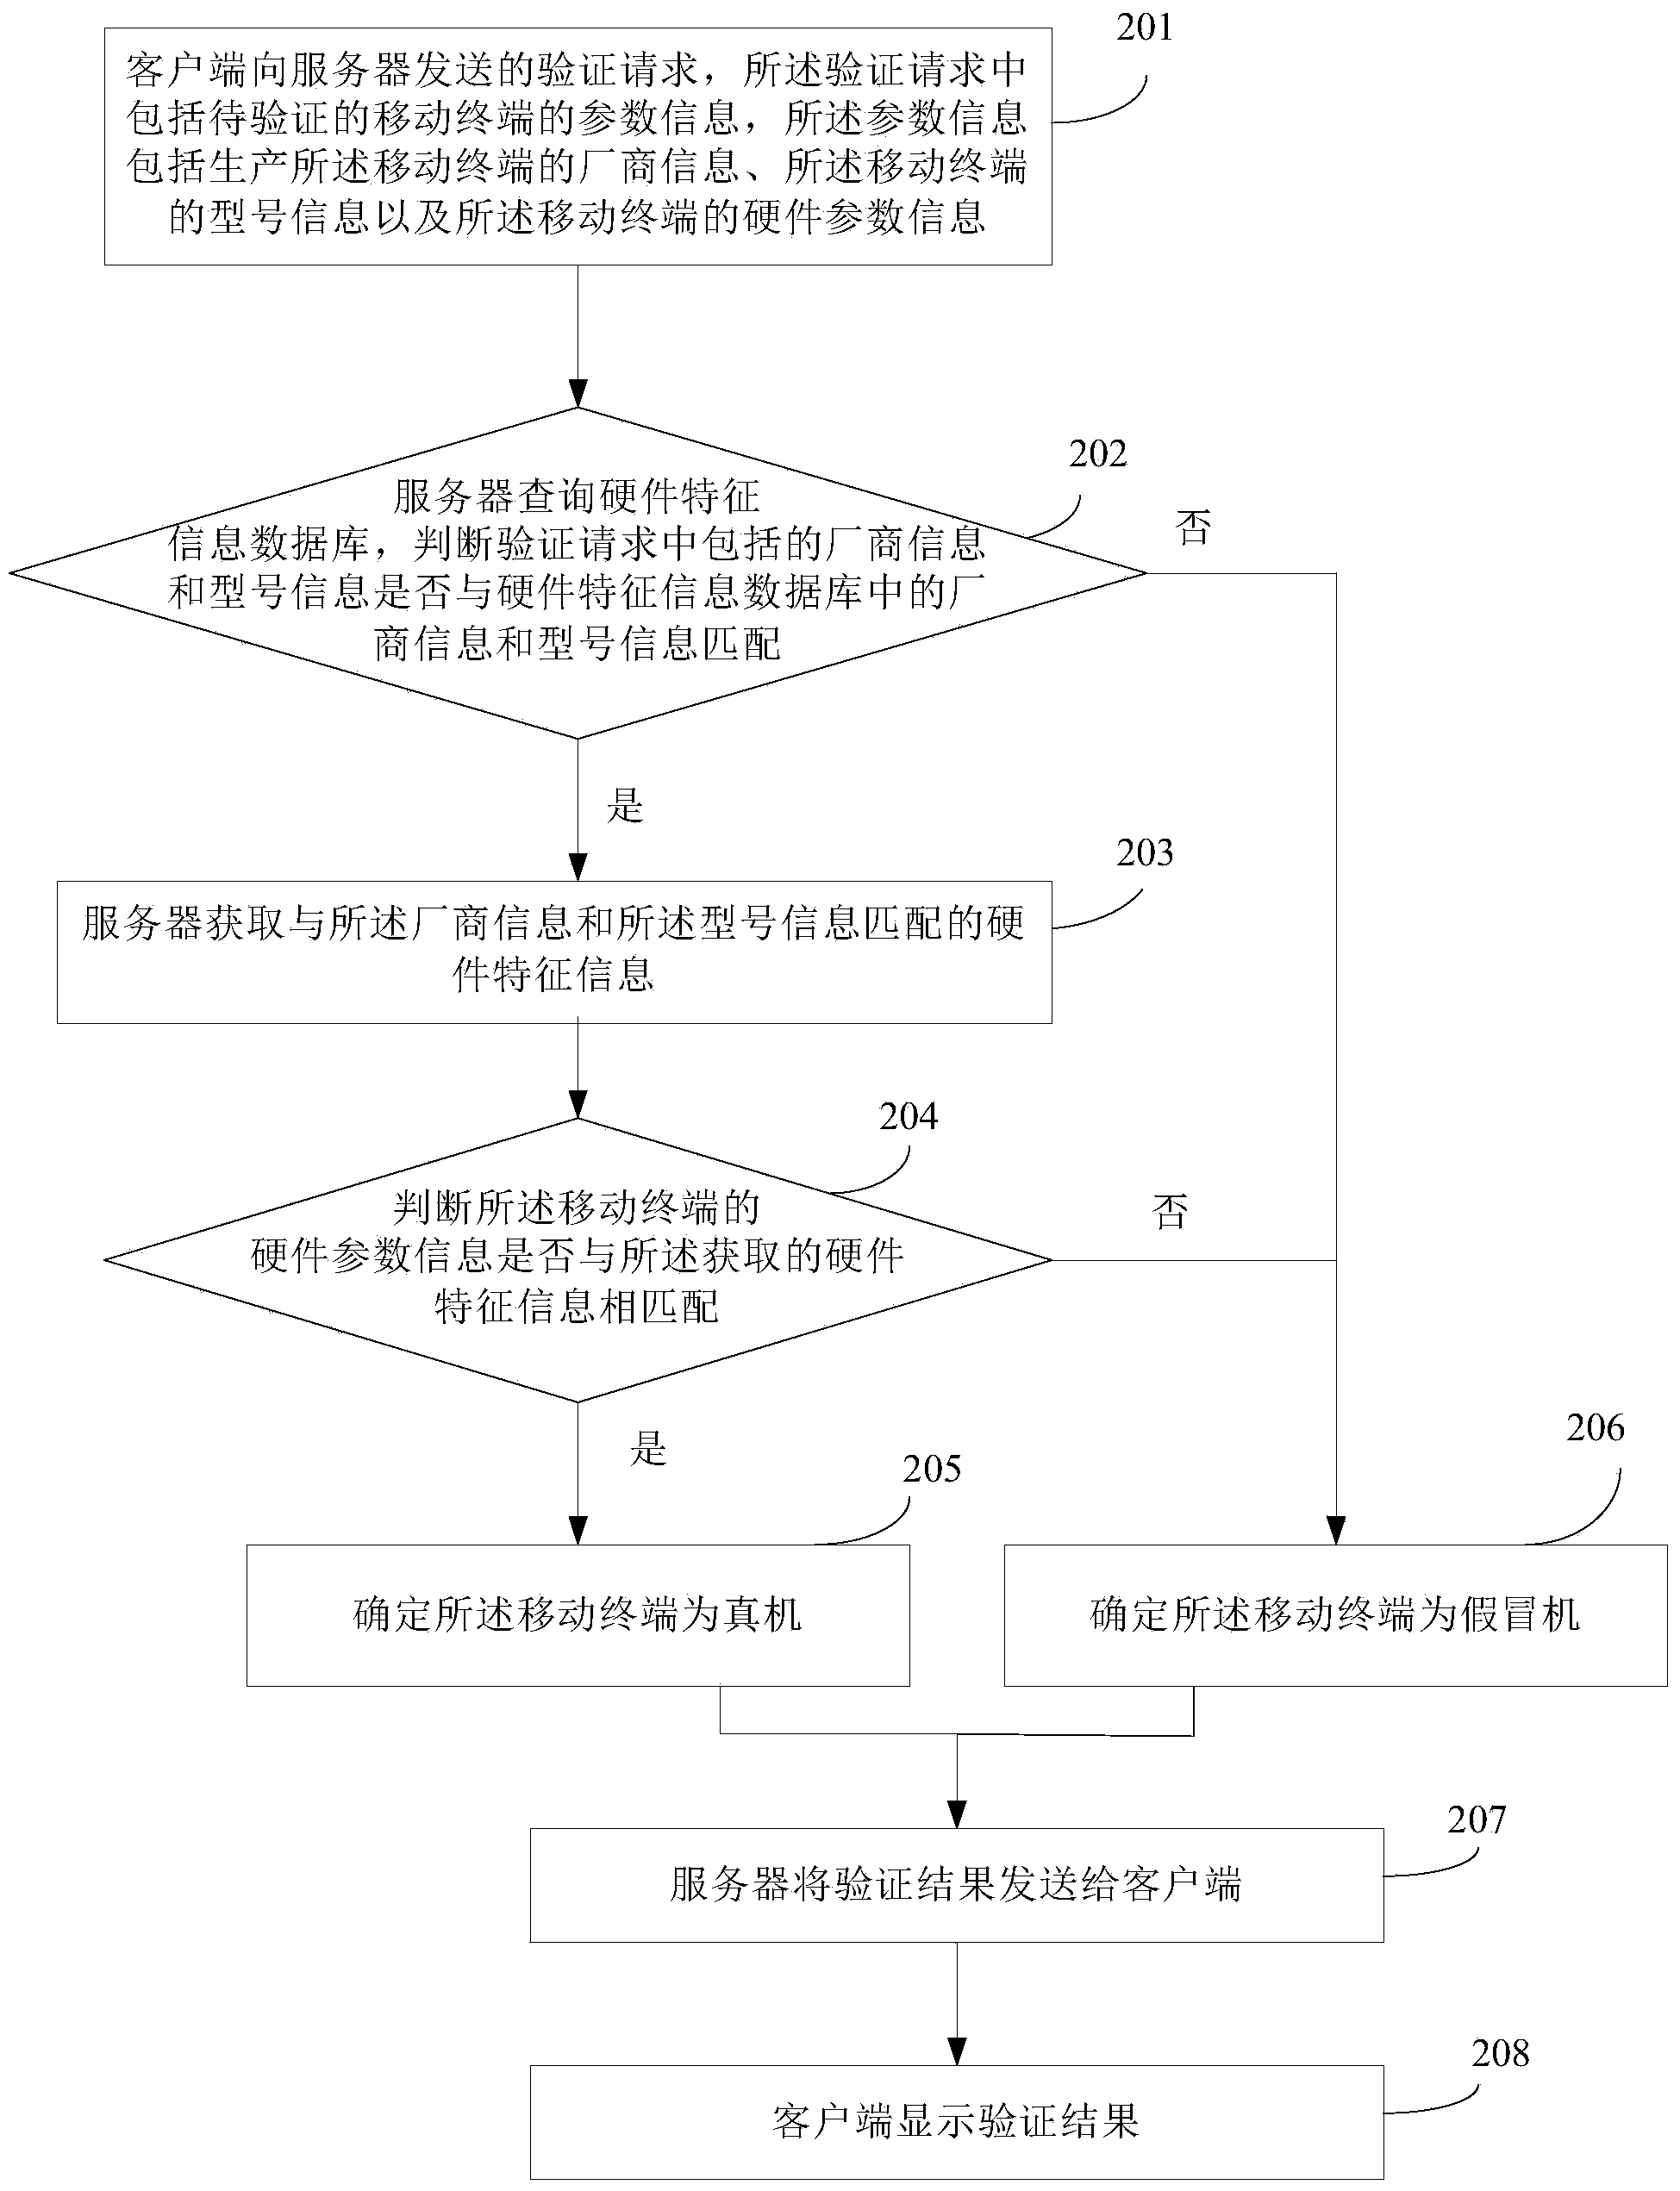 Mobile terminal identification method and device